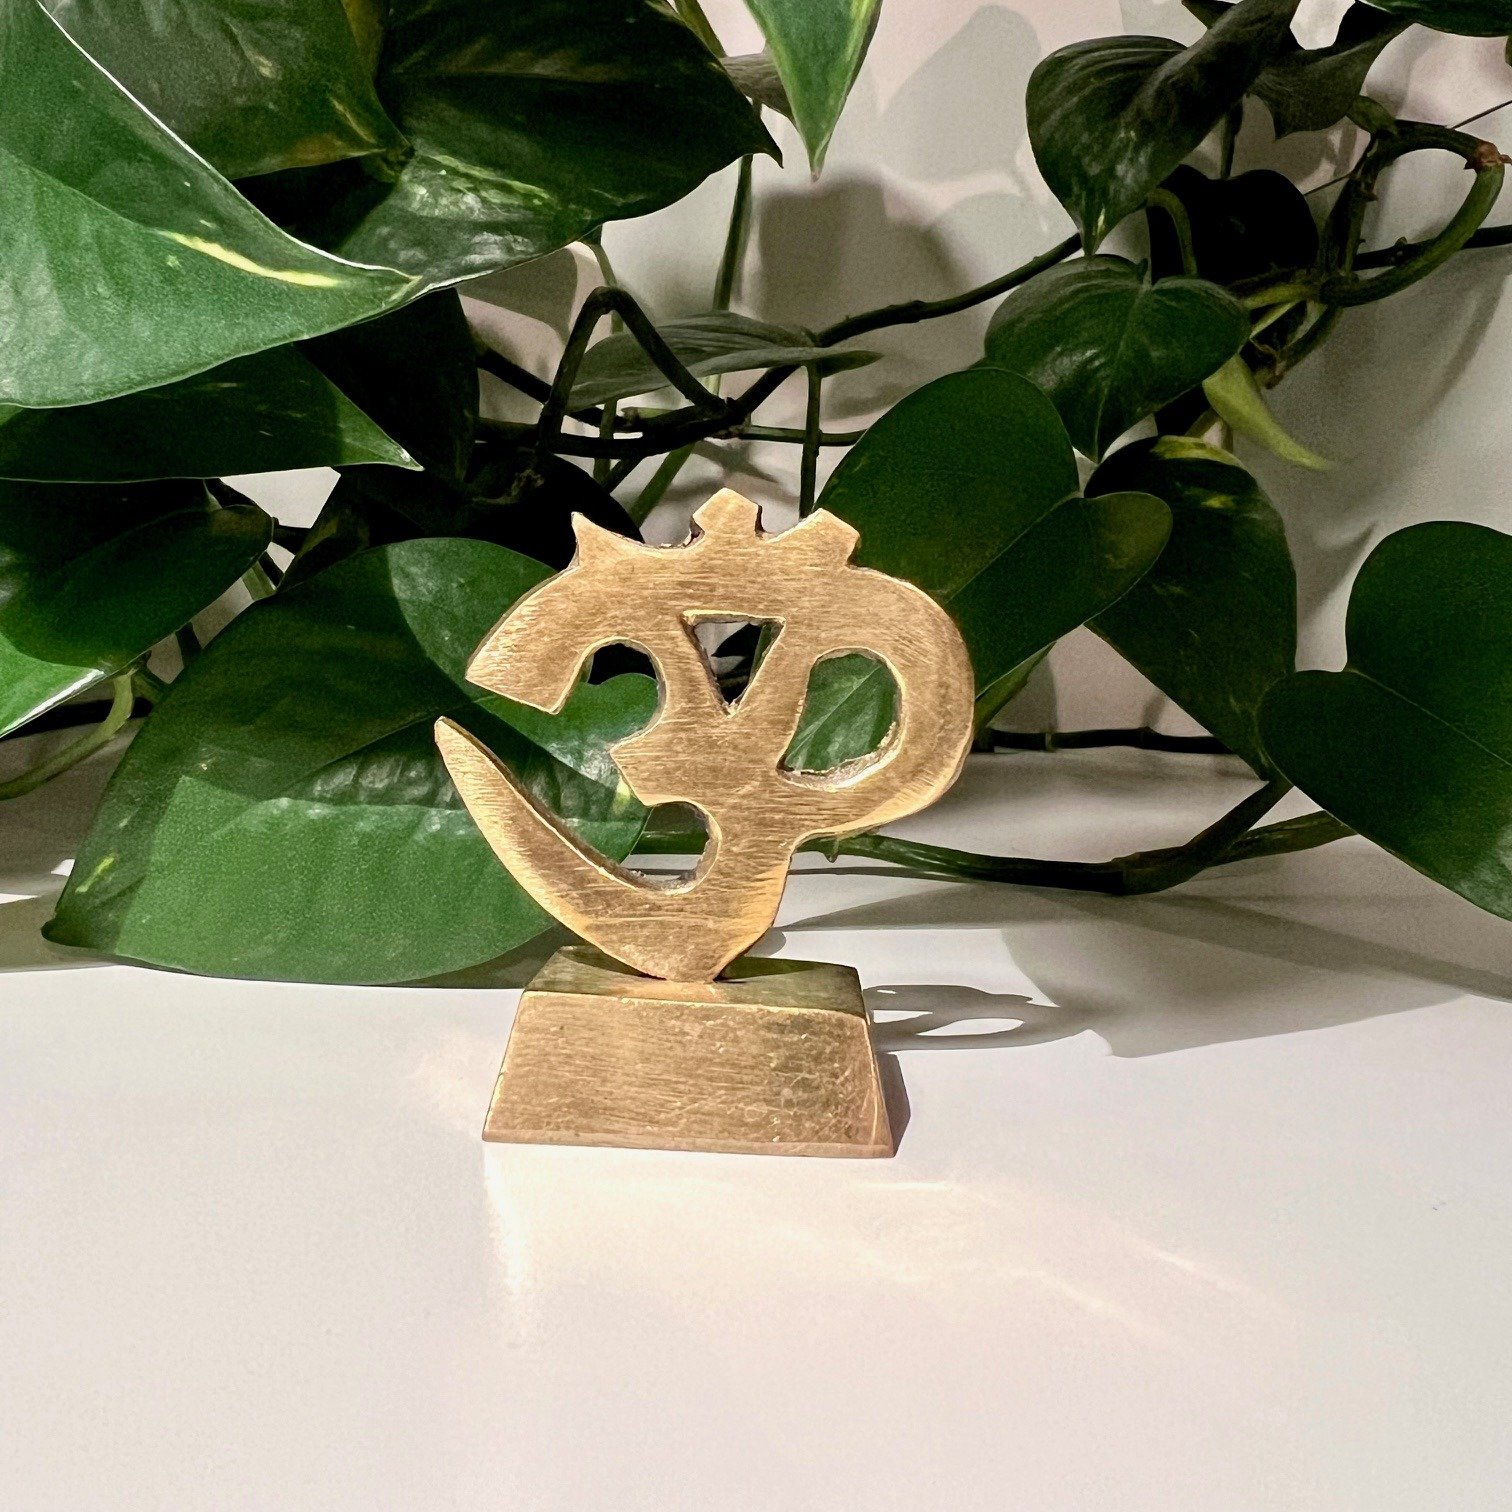 Check out these Brass Oms in Prop Shop✨

Our brass oms are a beautiful decoration for home practice, representing the uniting universal vibration. Available in 3 sizes.🧘

Online + in store at @ciy_houseofyoga. We ship worldwide 🌐 💜

🔗 www.propsho